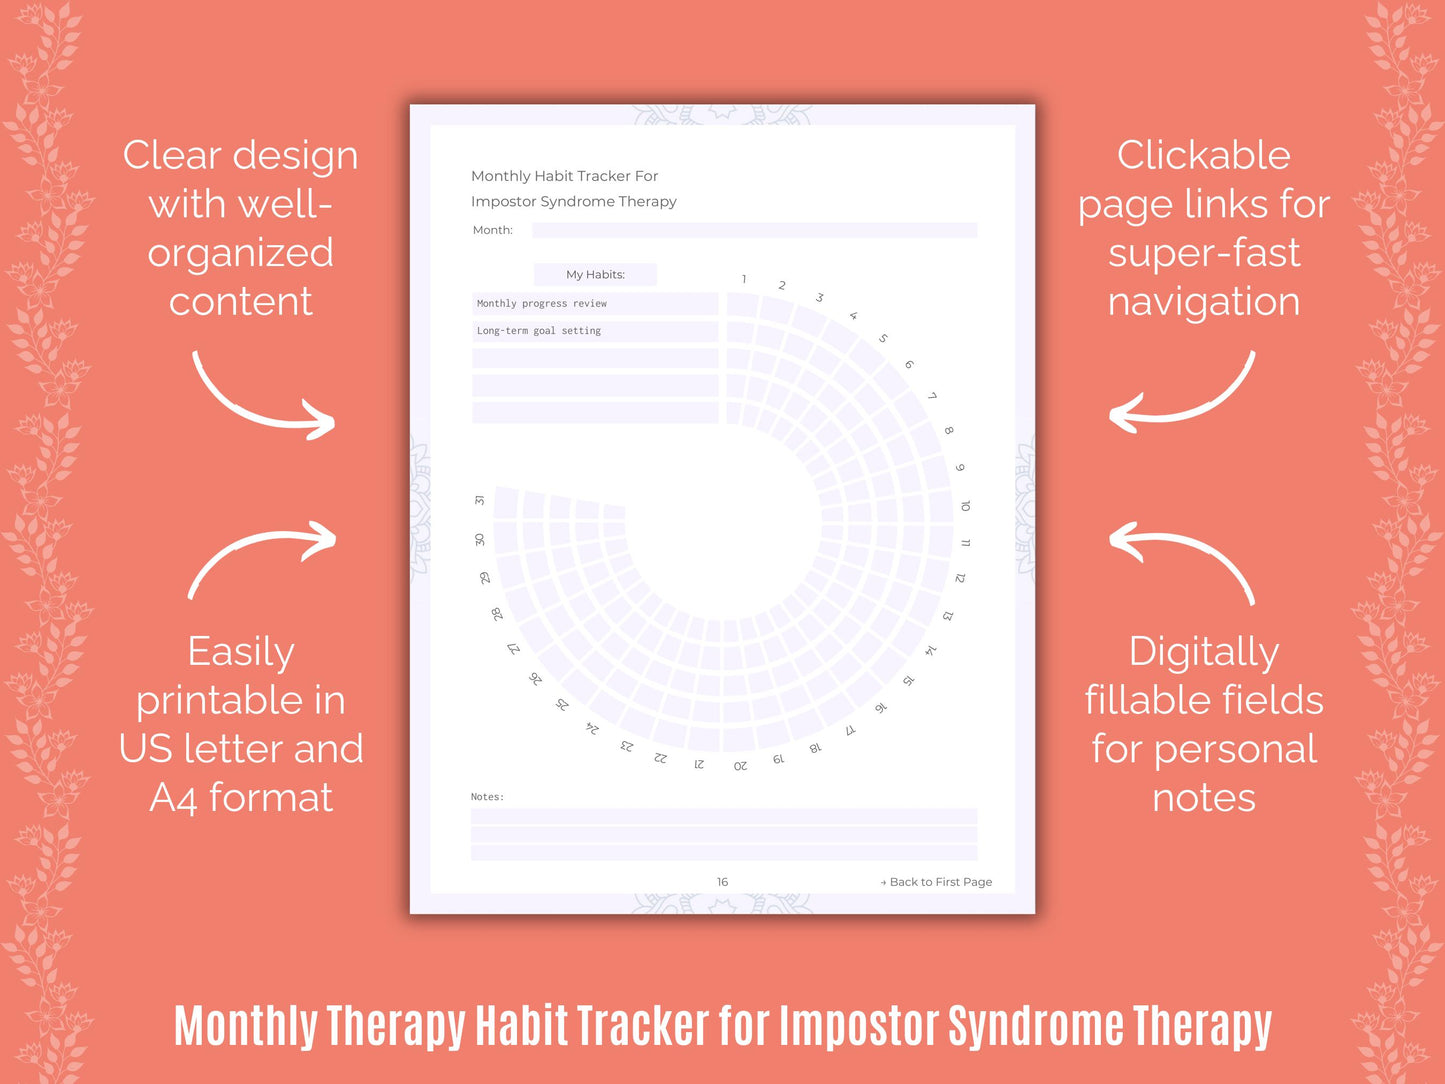 Counseling, Planners, Impostor Syndrome Therapy, Cheat Sheet, Journaling, Goal Setting, Therapy, Notes, Journals, Templates, Resources, Tools, Workbooks